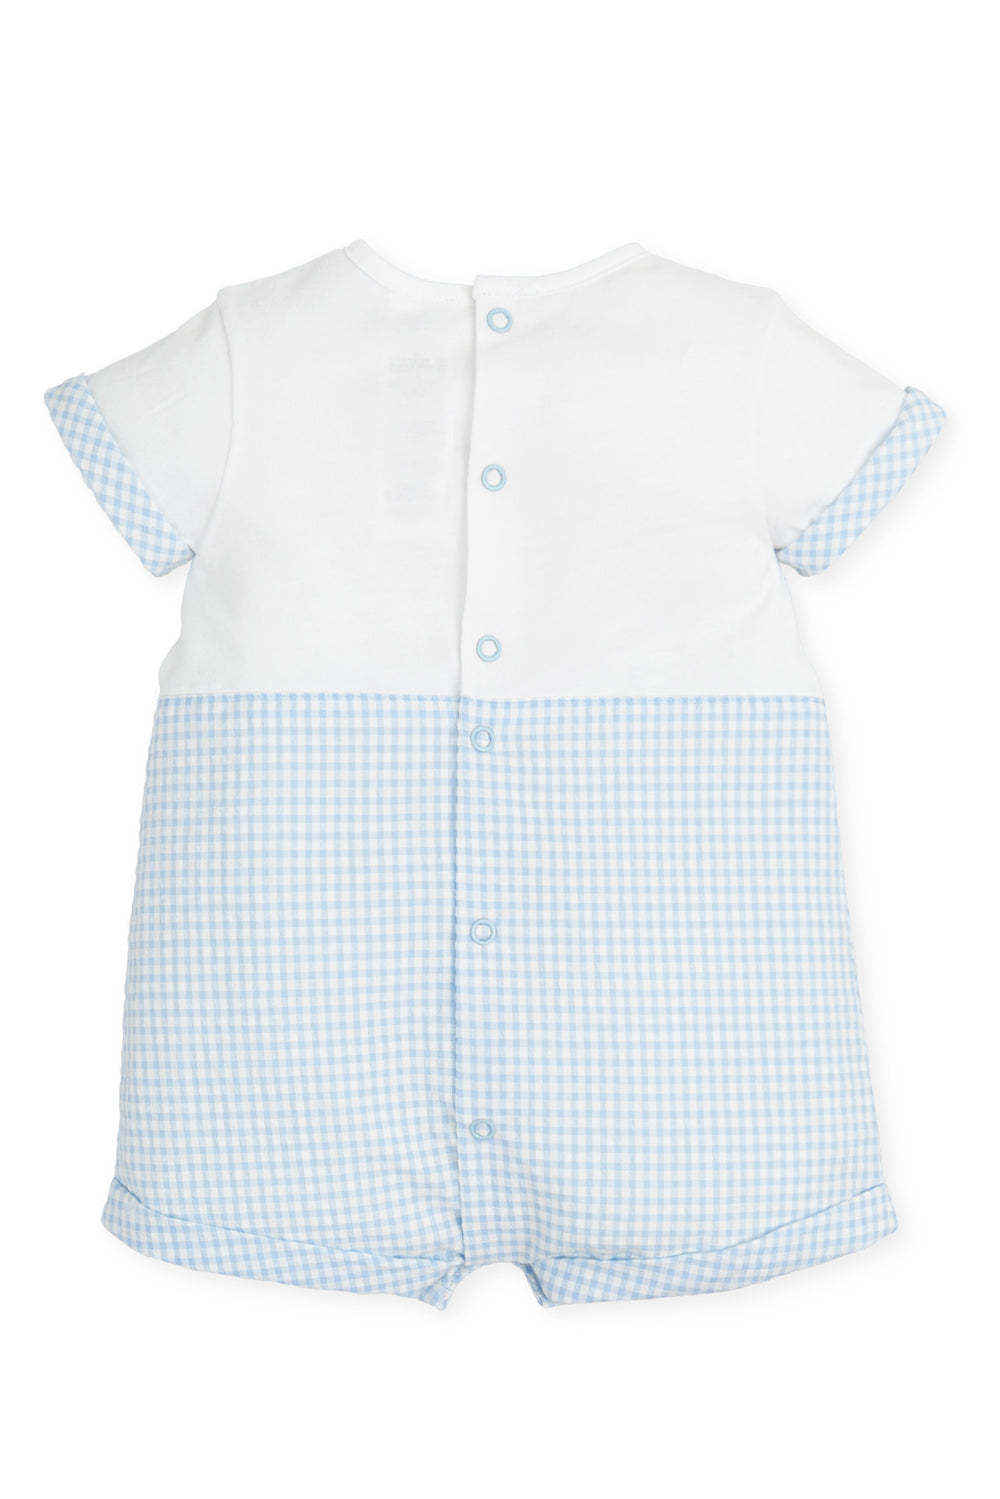 Tutto Piccolo "Amias" Blue Gingham Dungaree Romper | Millie and John